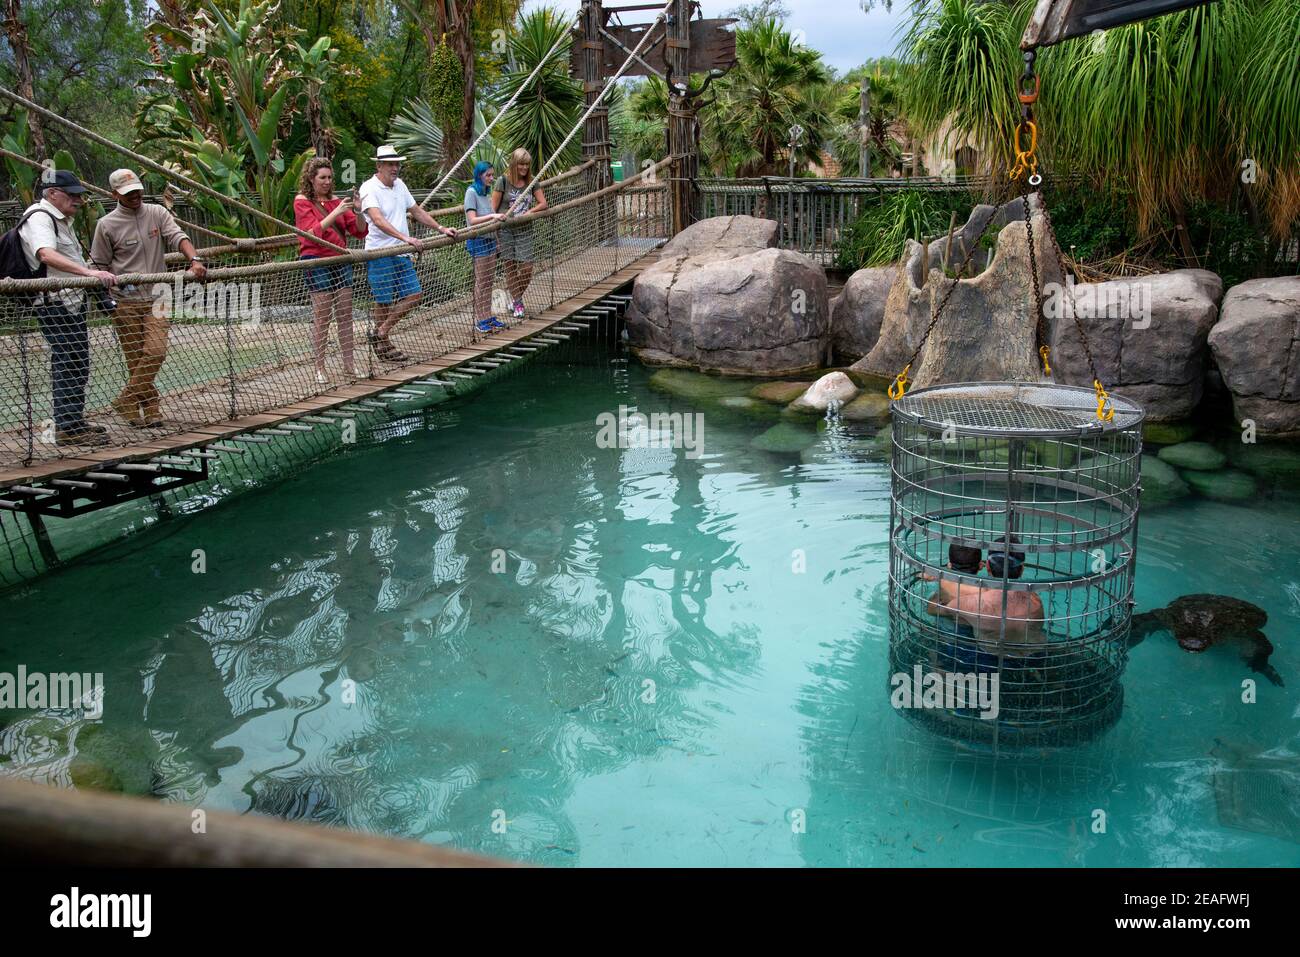 Tourists Father and son cage diving with a Nile crocodile in the pool at Cango Wildlife Ranch,Oudtshoorn.KAROO,SOUTH AFRICA Stock Photo